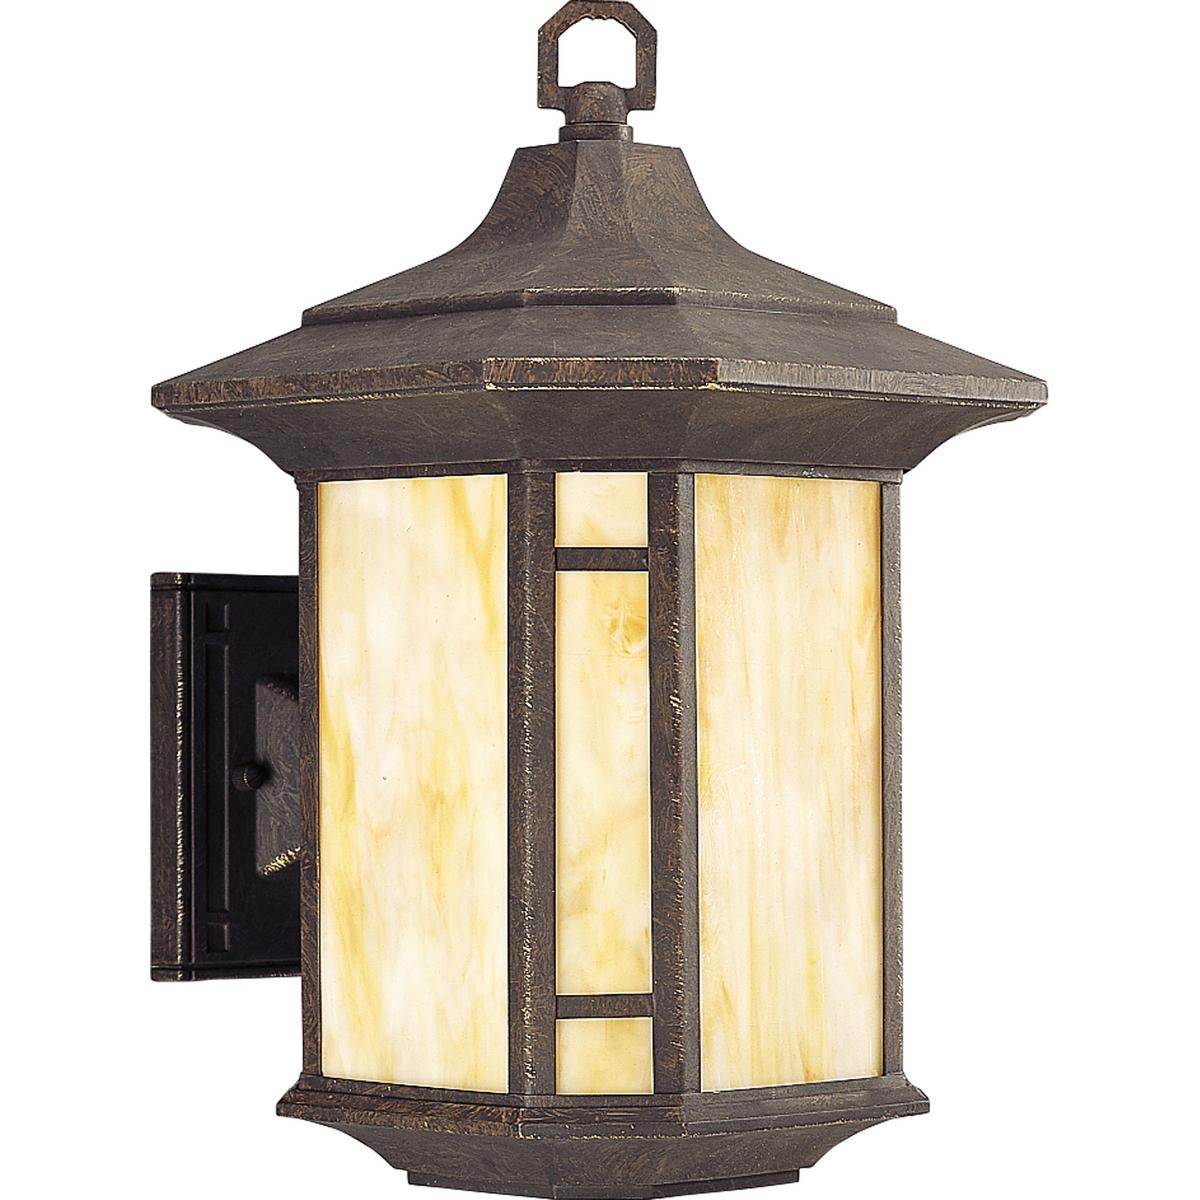 Hubbell P5629-46 One-light 10 inch wall lantern with Honey Art glass and mica accent panels. The craftsman styling of this fixture is perfect for many exteriors.  ; Weathered Bronze finish. ; Honey Art glass accented by rich hand painted details. ; Solid metal frame with 